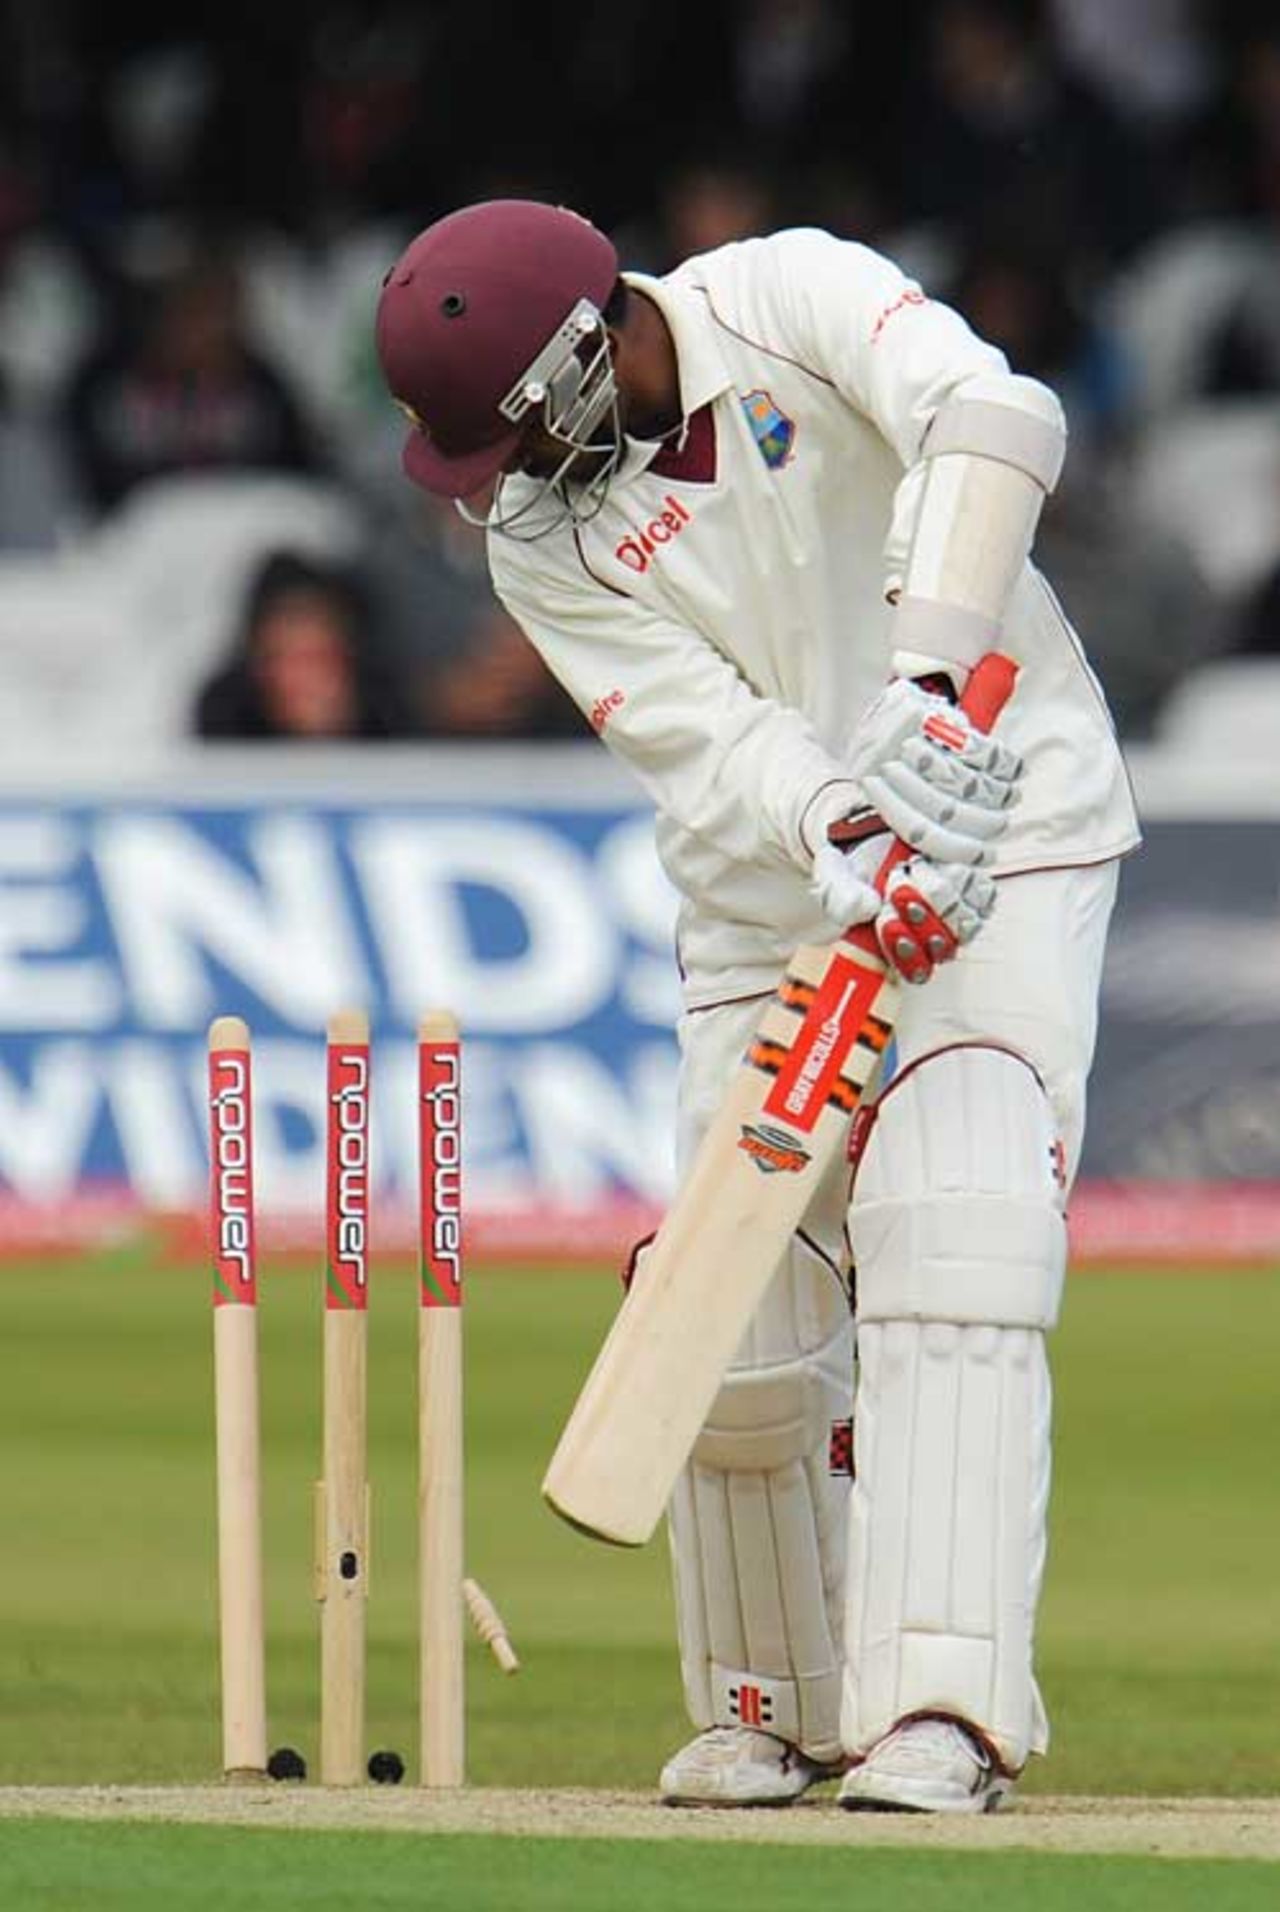 Denesh Ramdin is bowled after an impressive 66, England v West Indies, 1st Test, Lord's, May 8, 2009